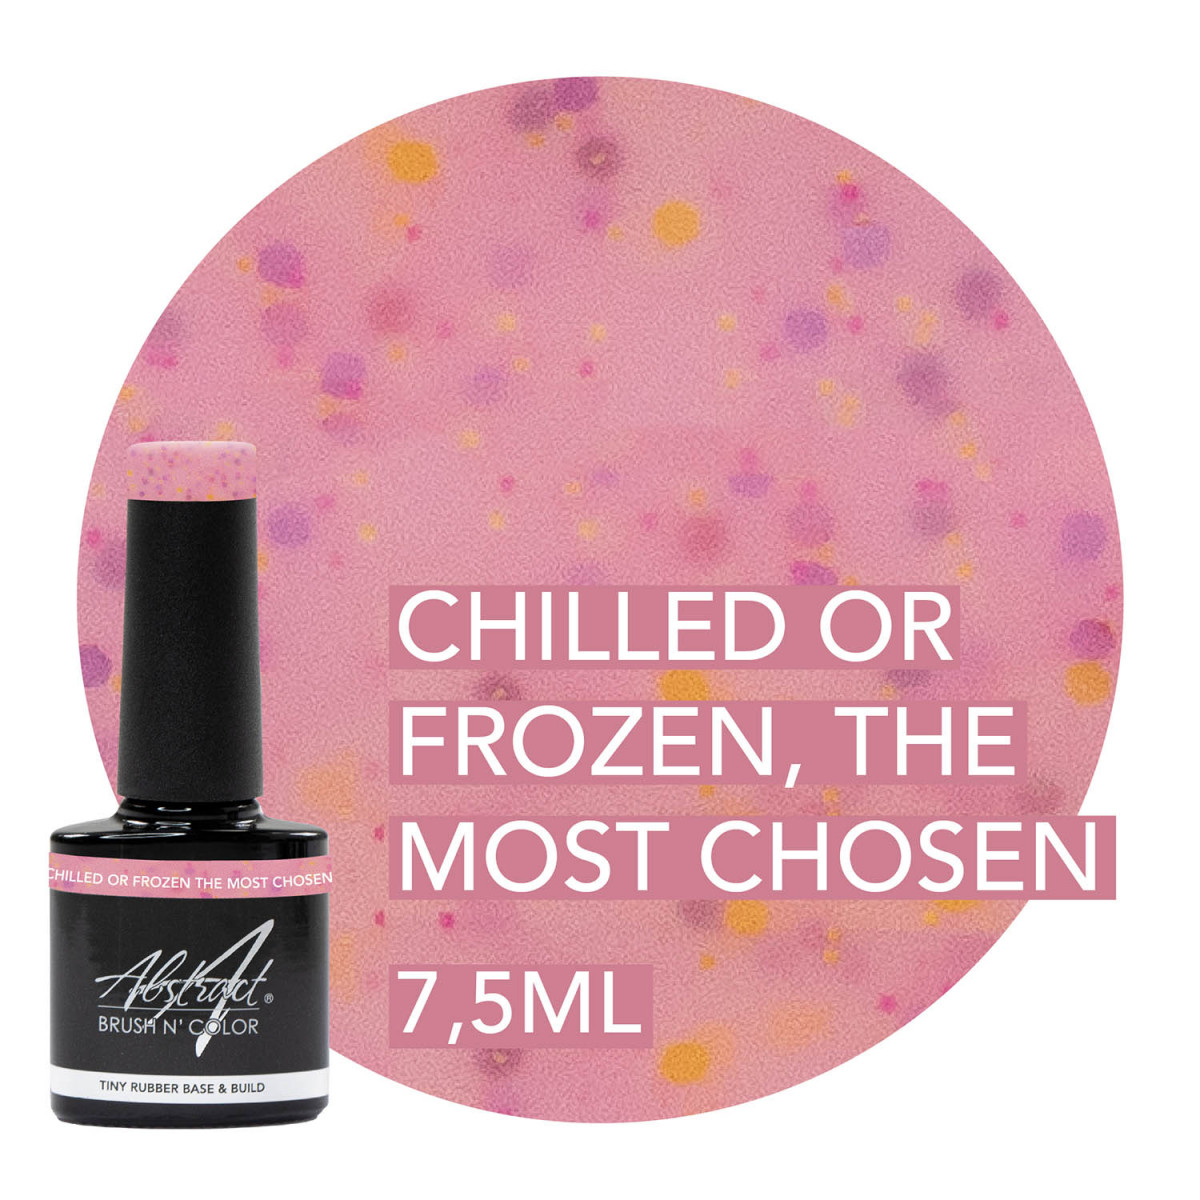 PRE-ORDER Chilled Or Frozen The Most Chosen - TINY Rubber Base & Build Gel Abstract